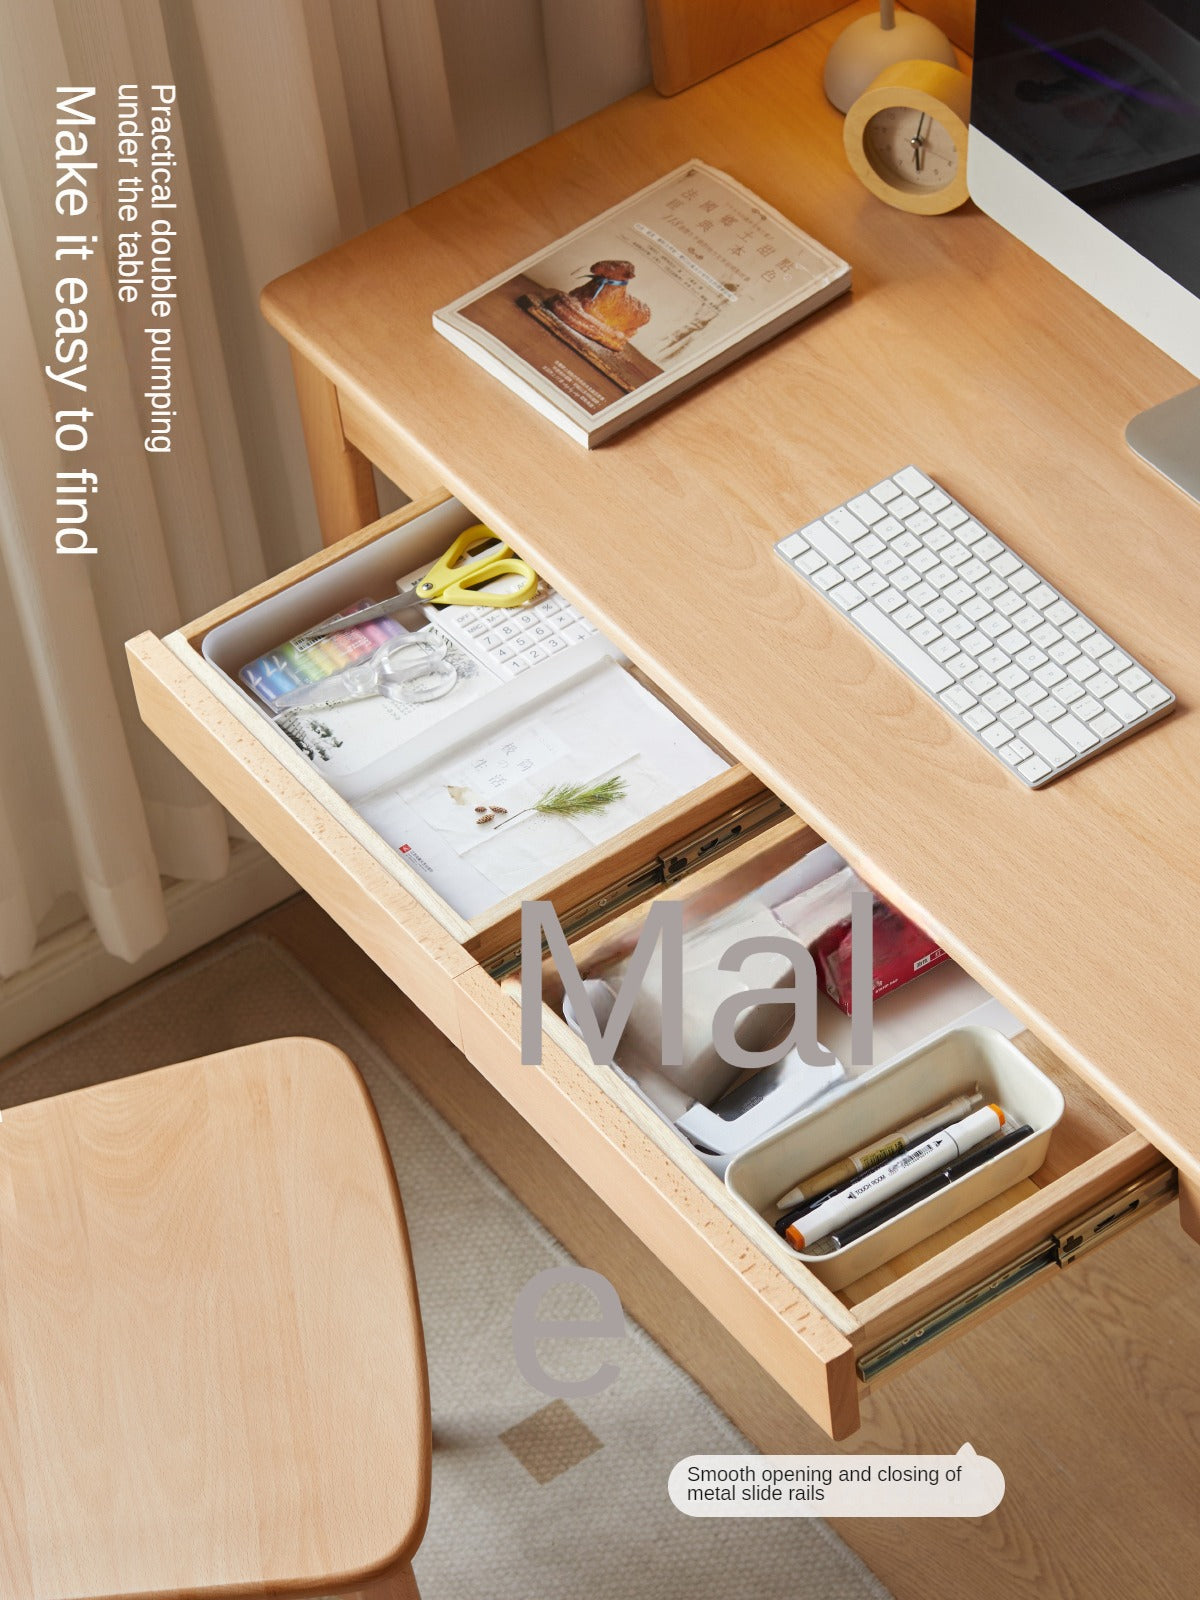 Beech solid wood office desk and bookshelf integrated Nordic -